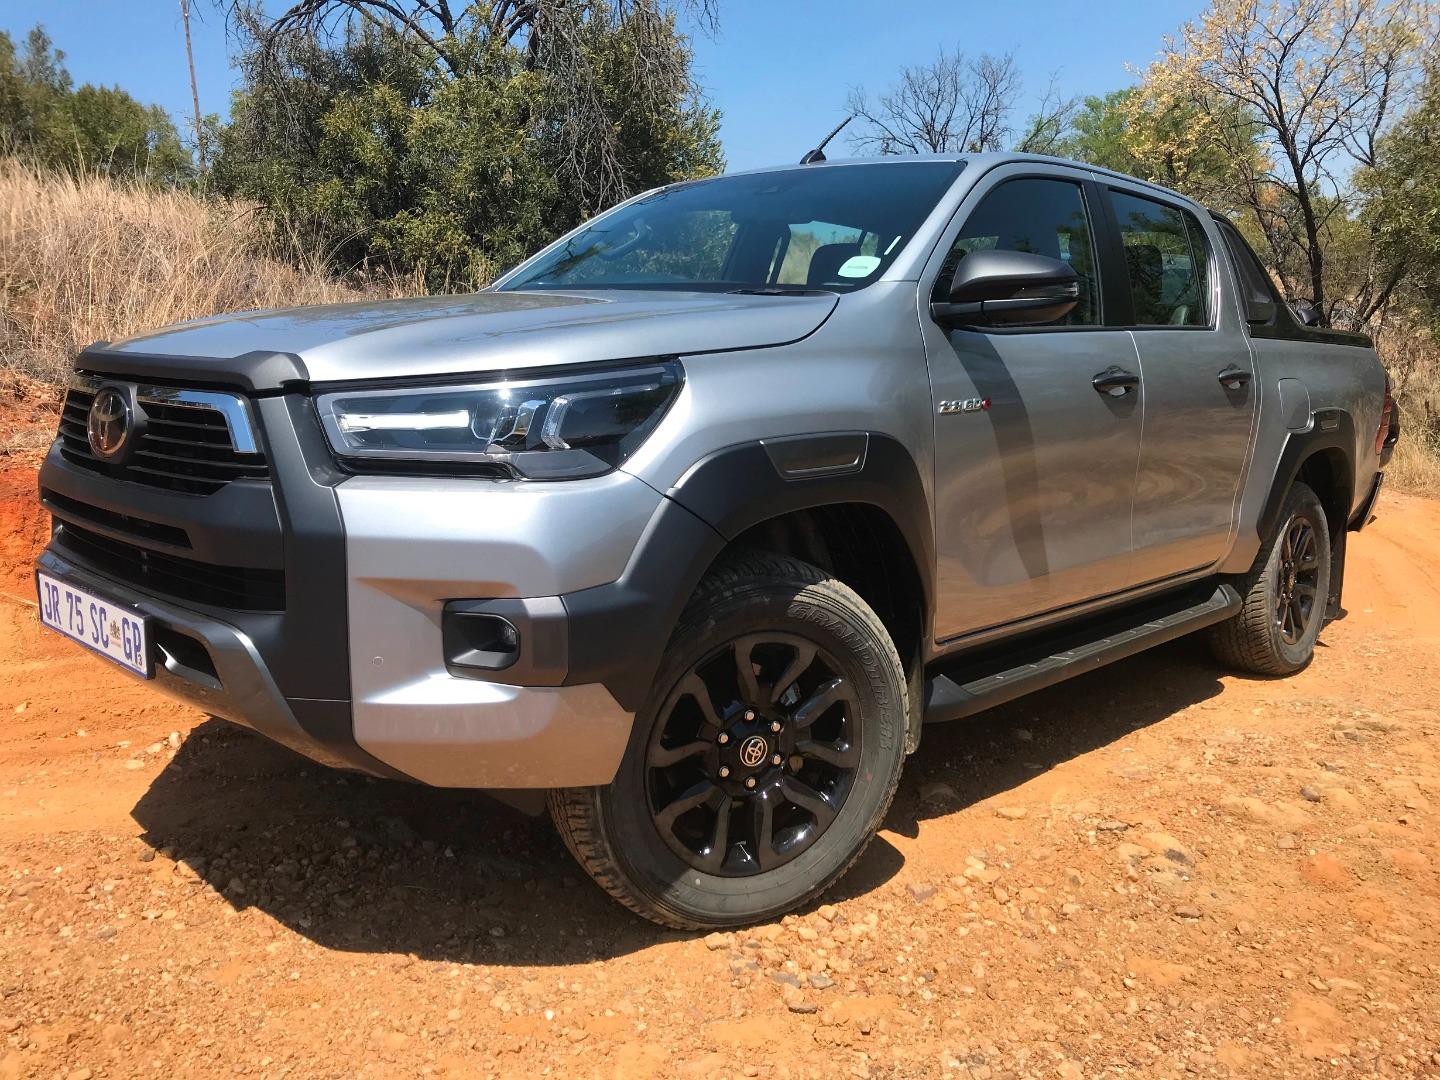 which toyota hilux engine is better: petrol or diesel?